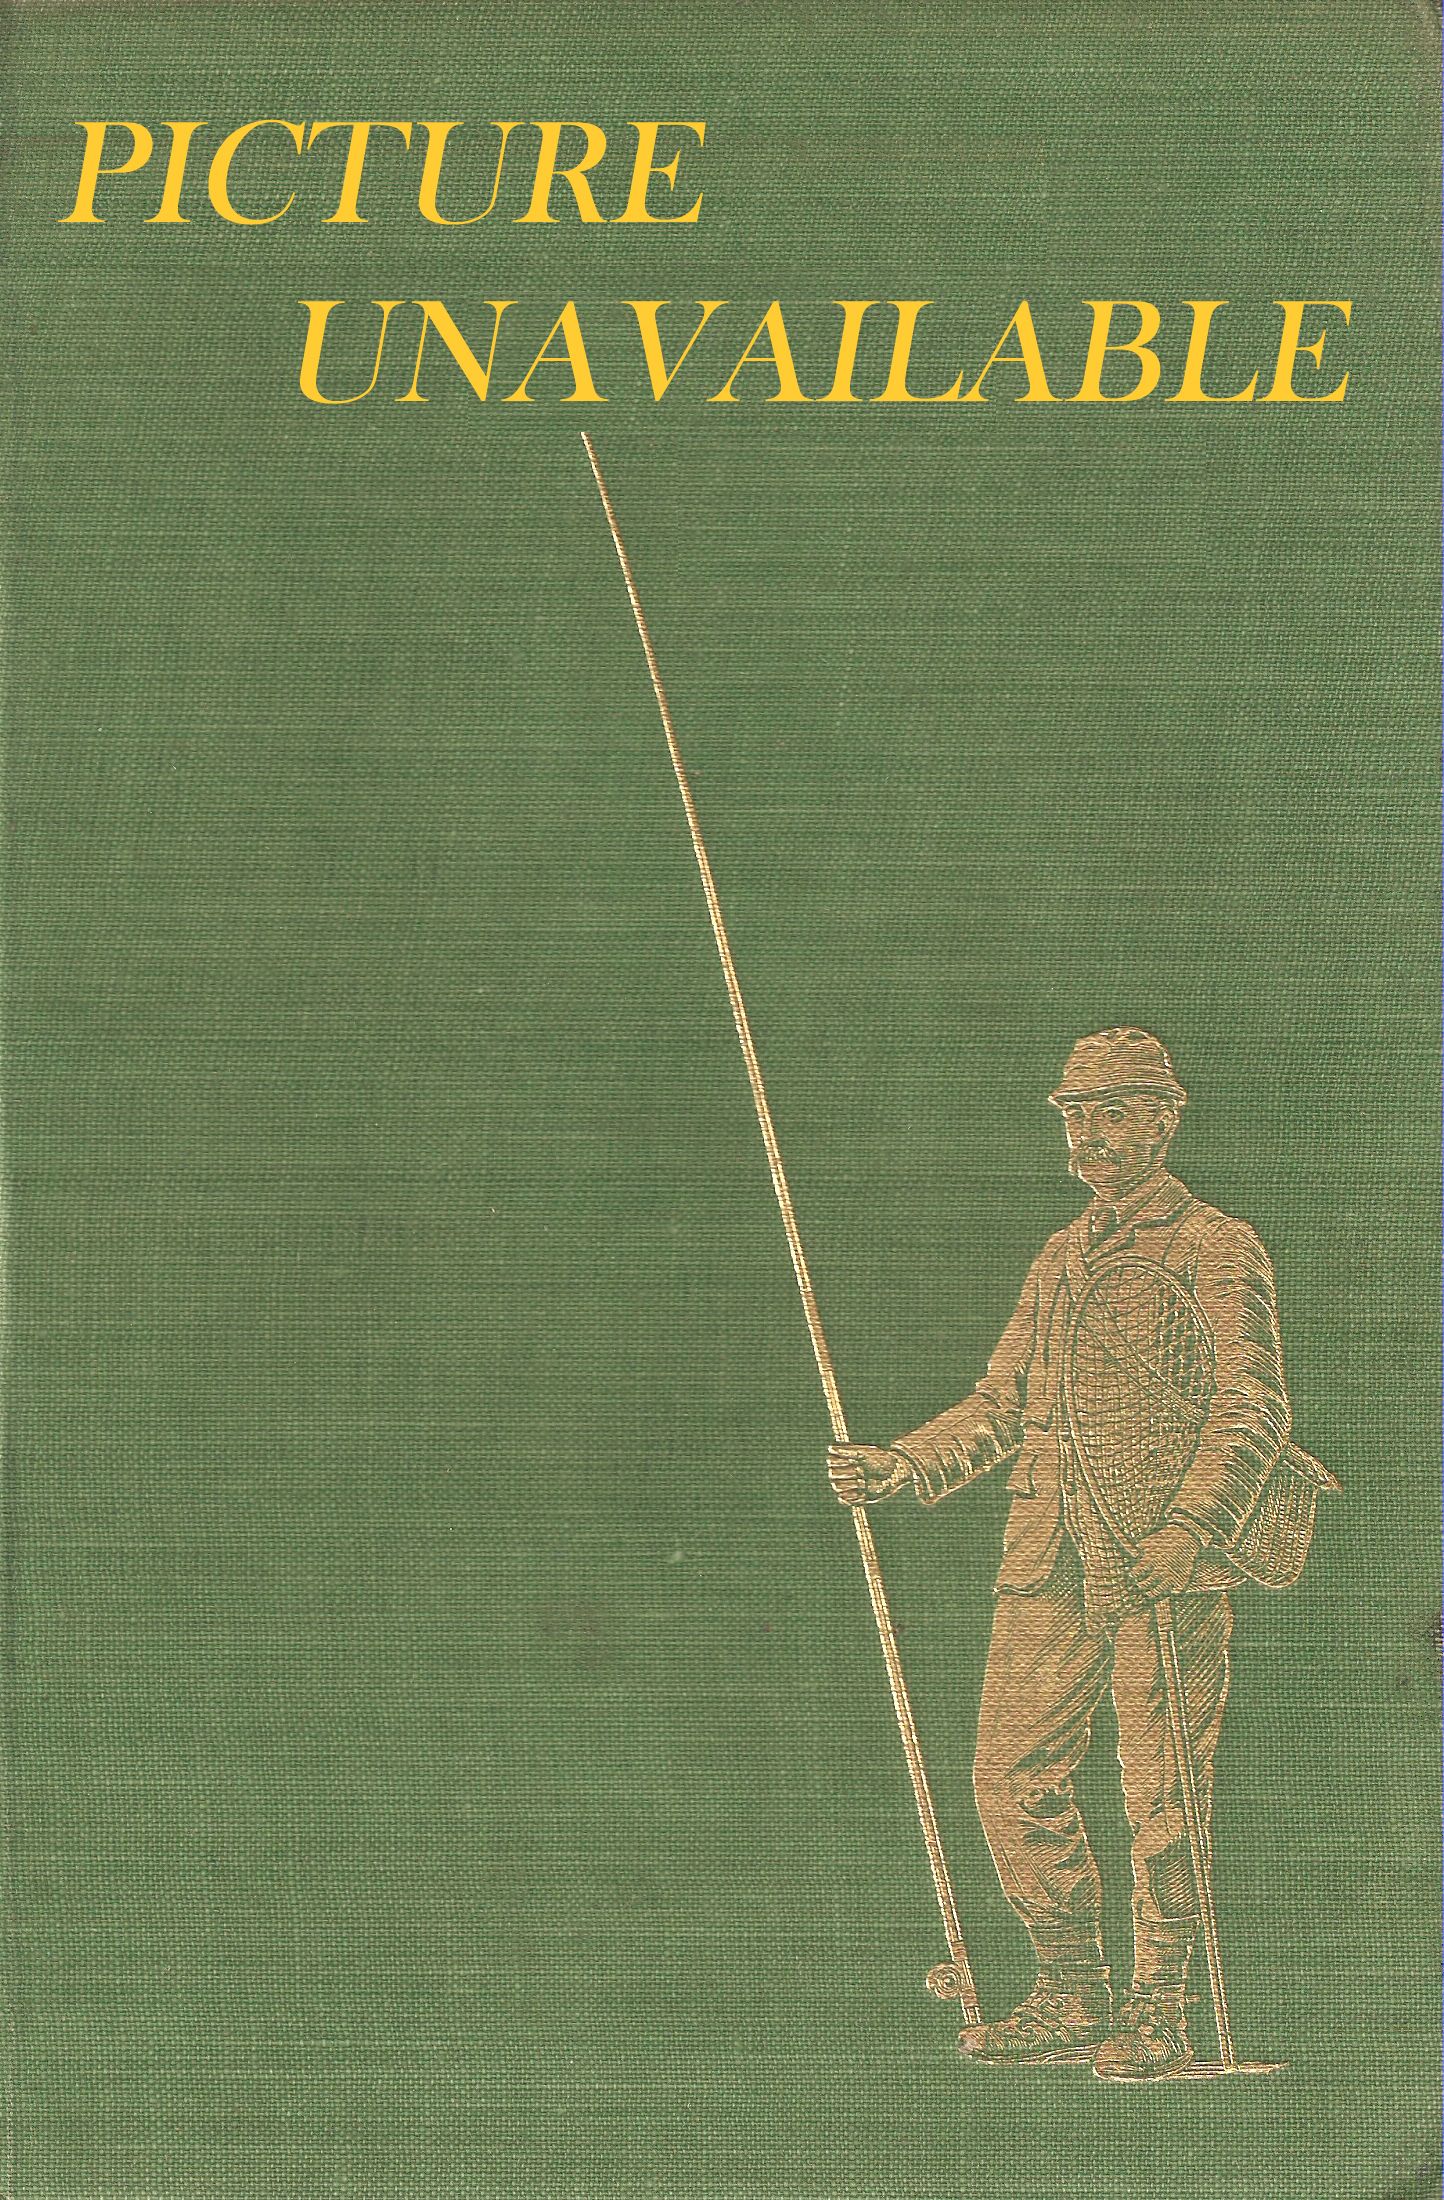 THE GENTLE ART OF ANGLING. By Bernard Venables. With drawings by the  author.